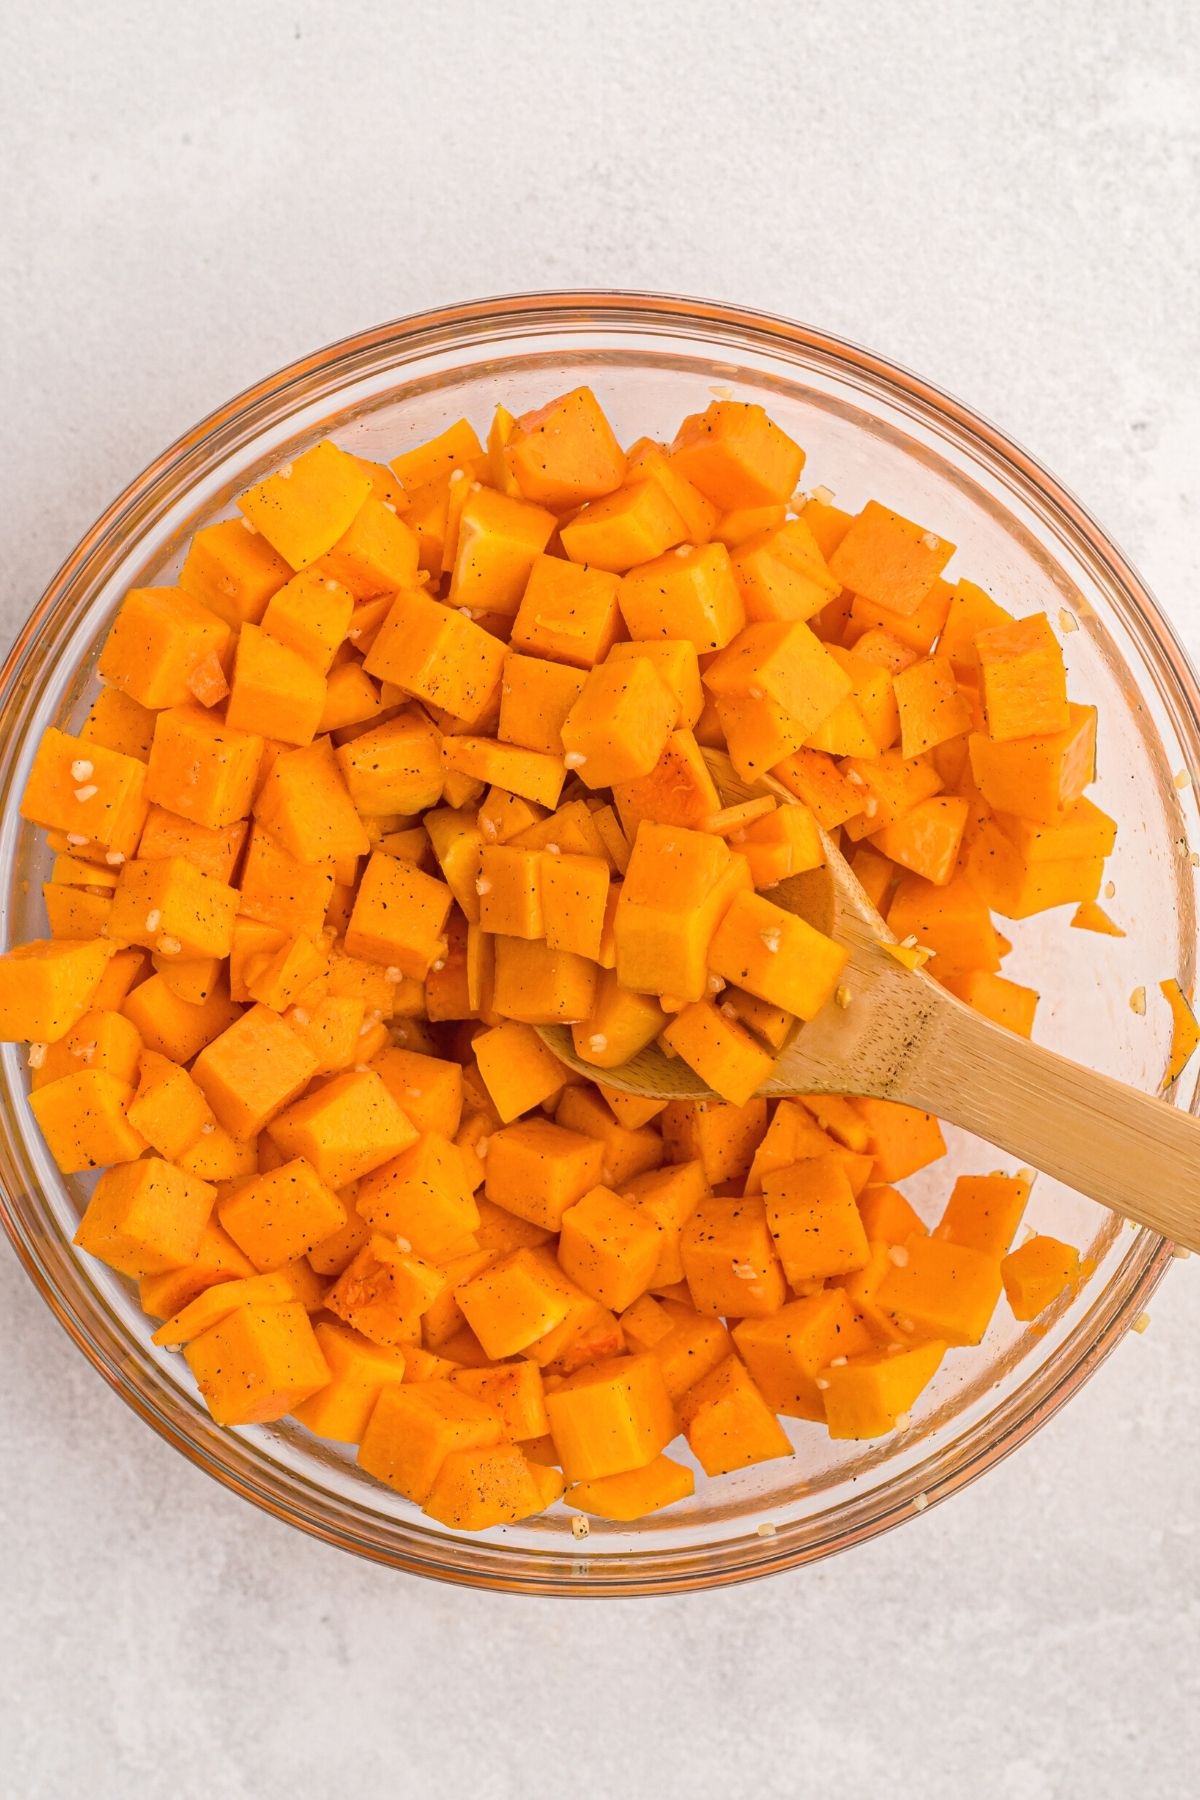 Orange butternut squash in a glass bowl being mixed with seasonings with a wooden spoon